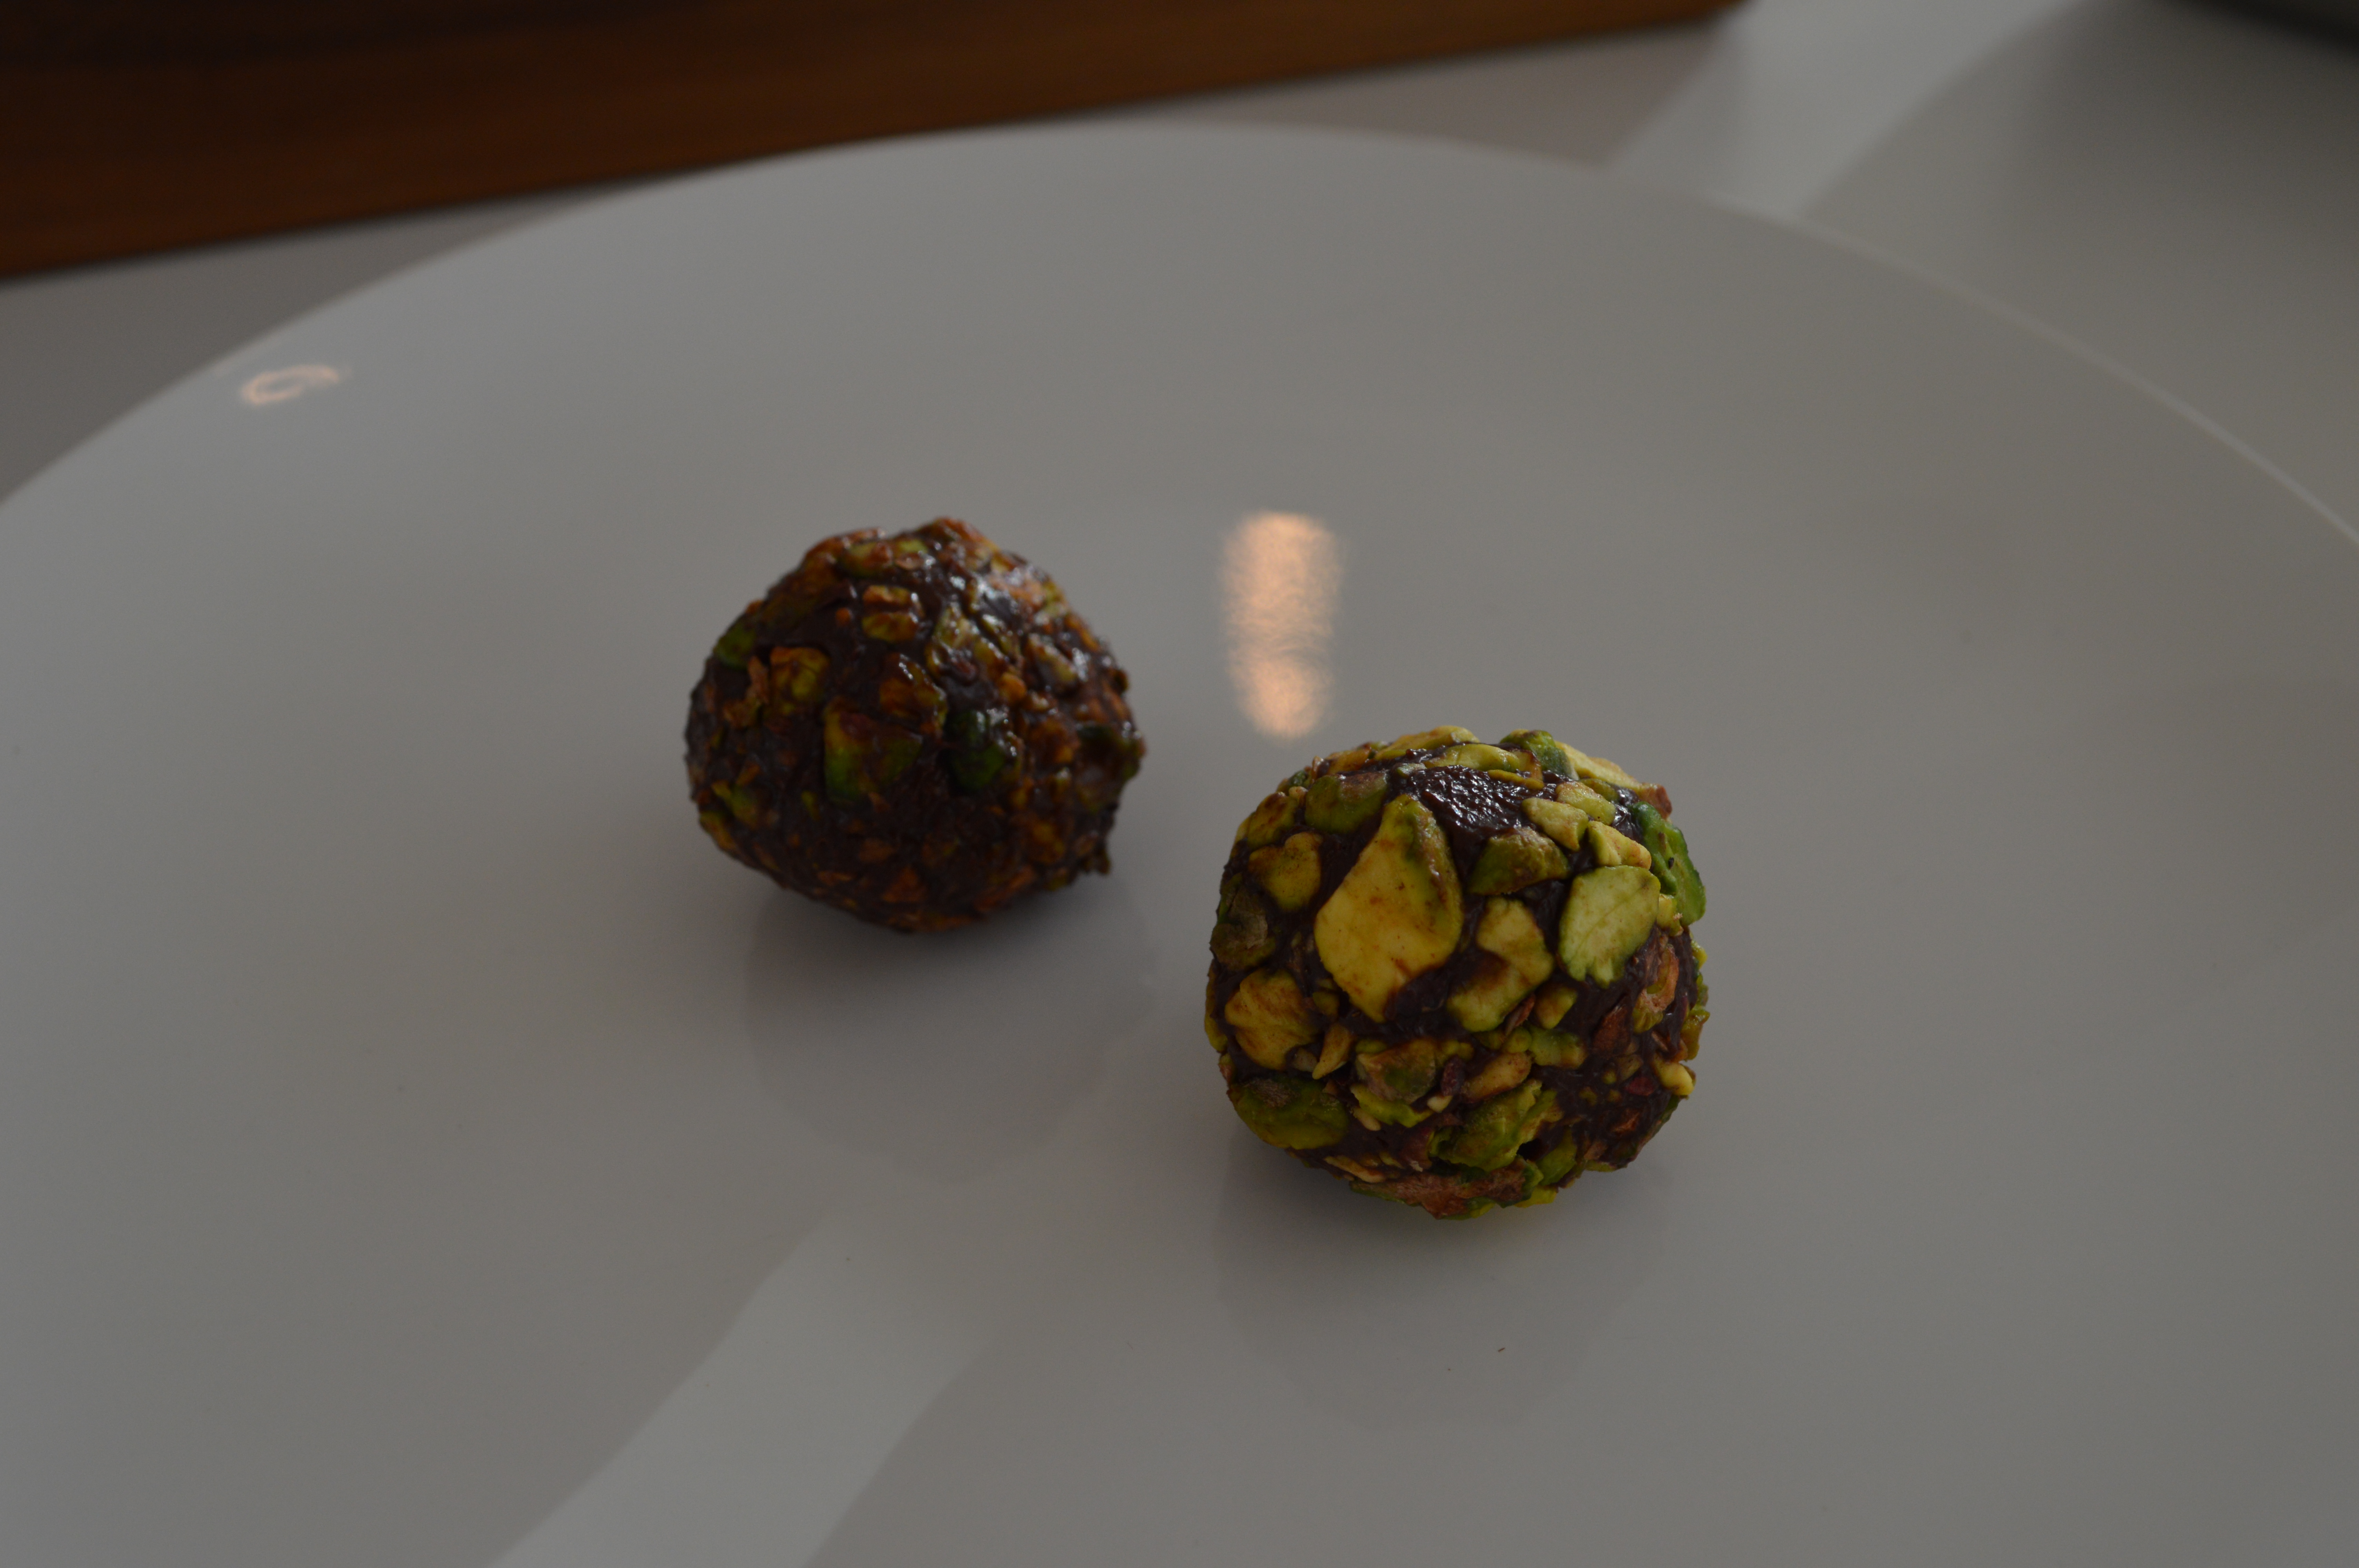 Poorly made truffles